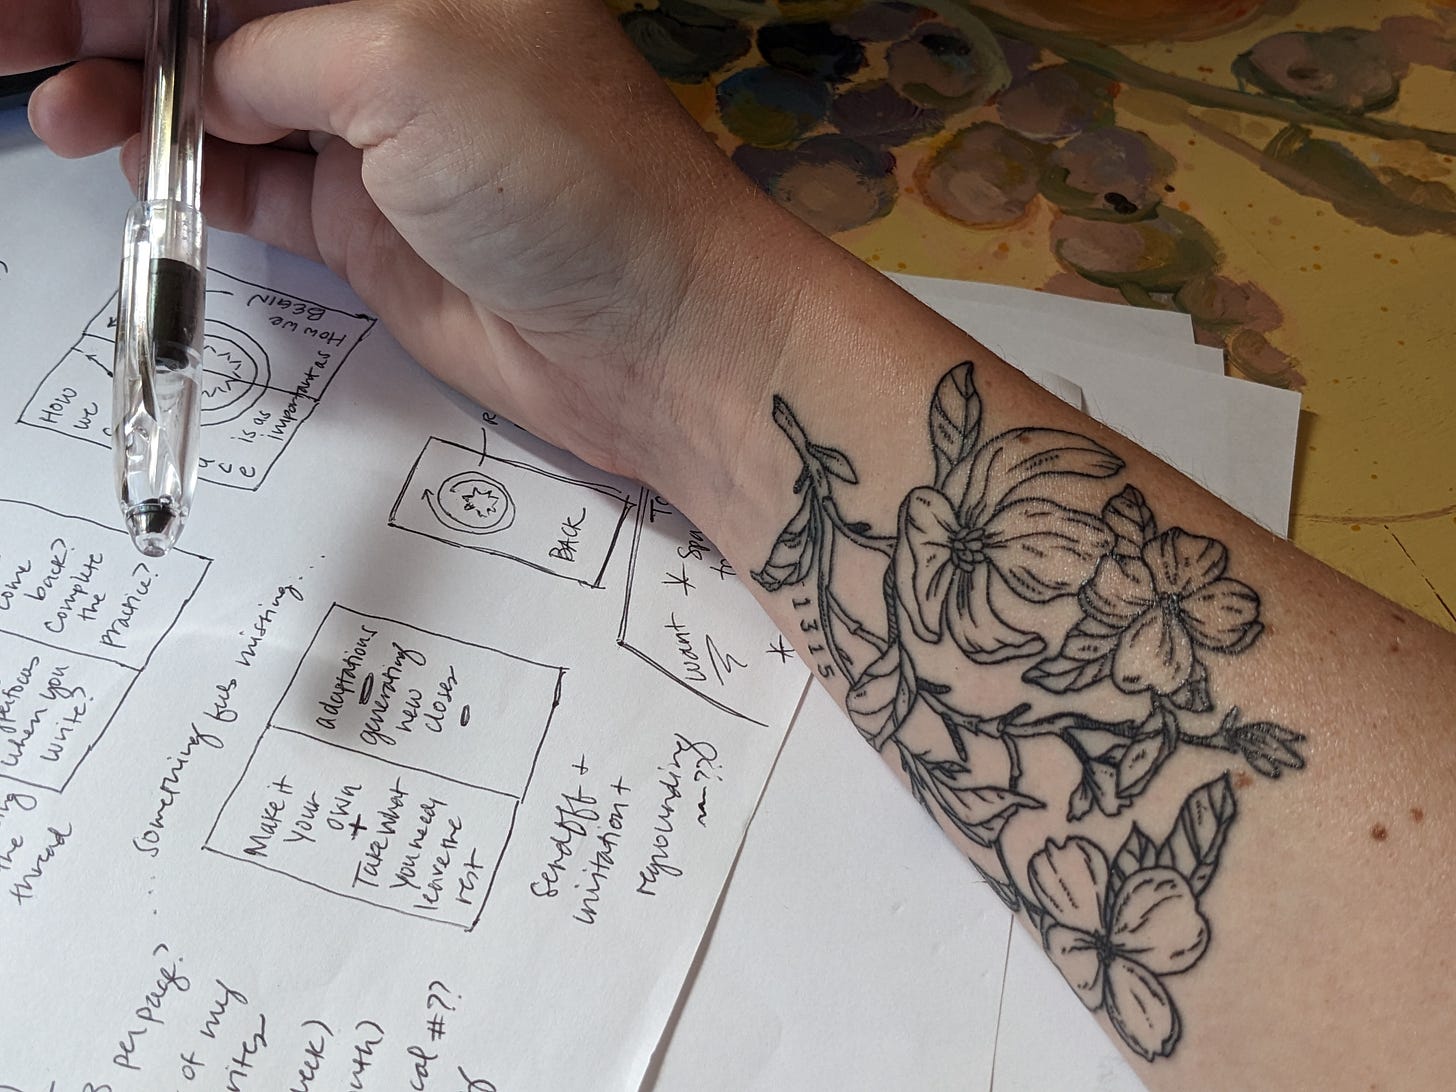 My arm rests on a page of notes, and there is a black linework tattoo on my wrist and inner forearm. The tattoo is of a dogwood branch in bloom.